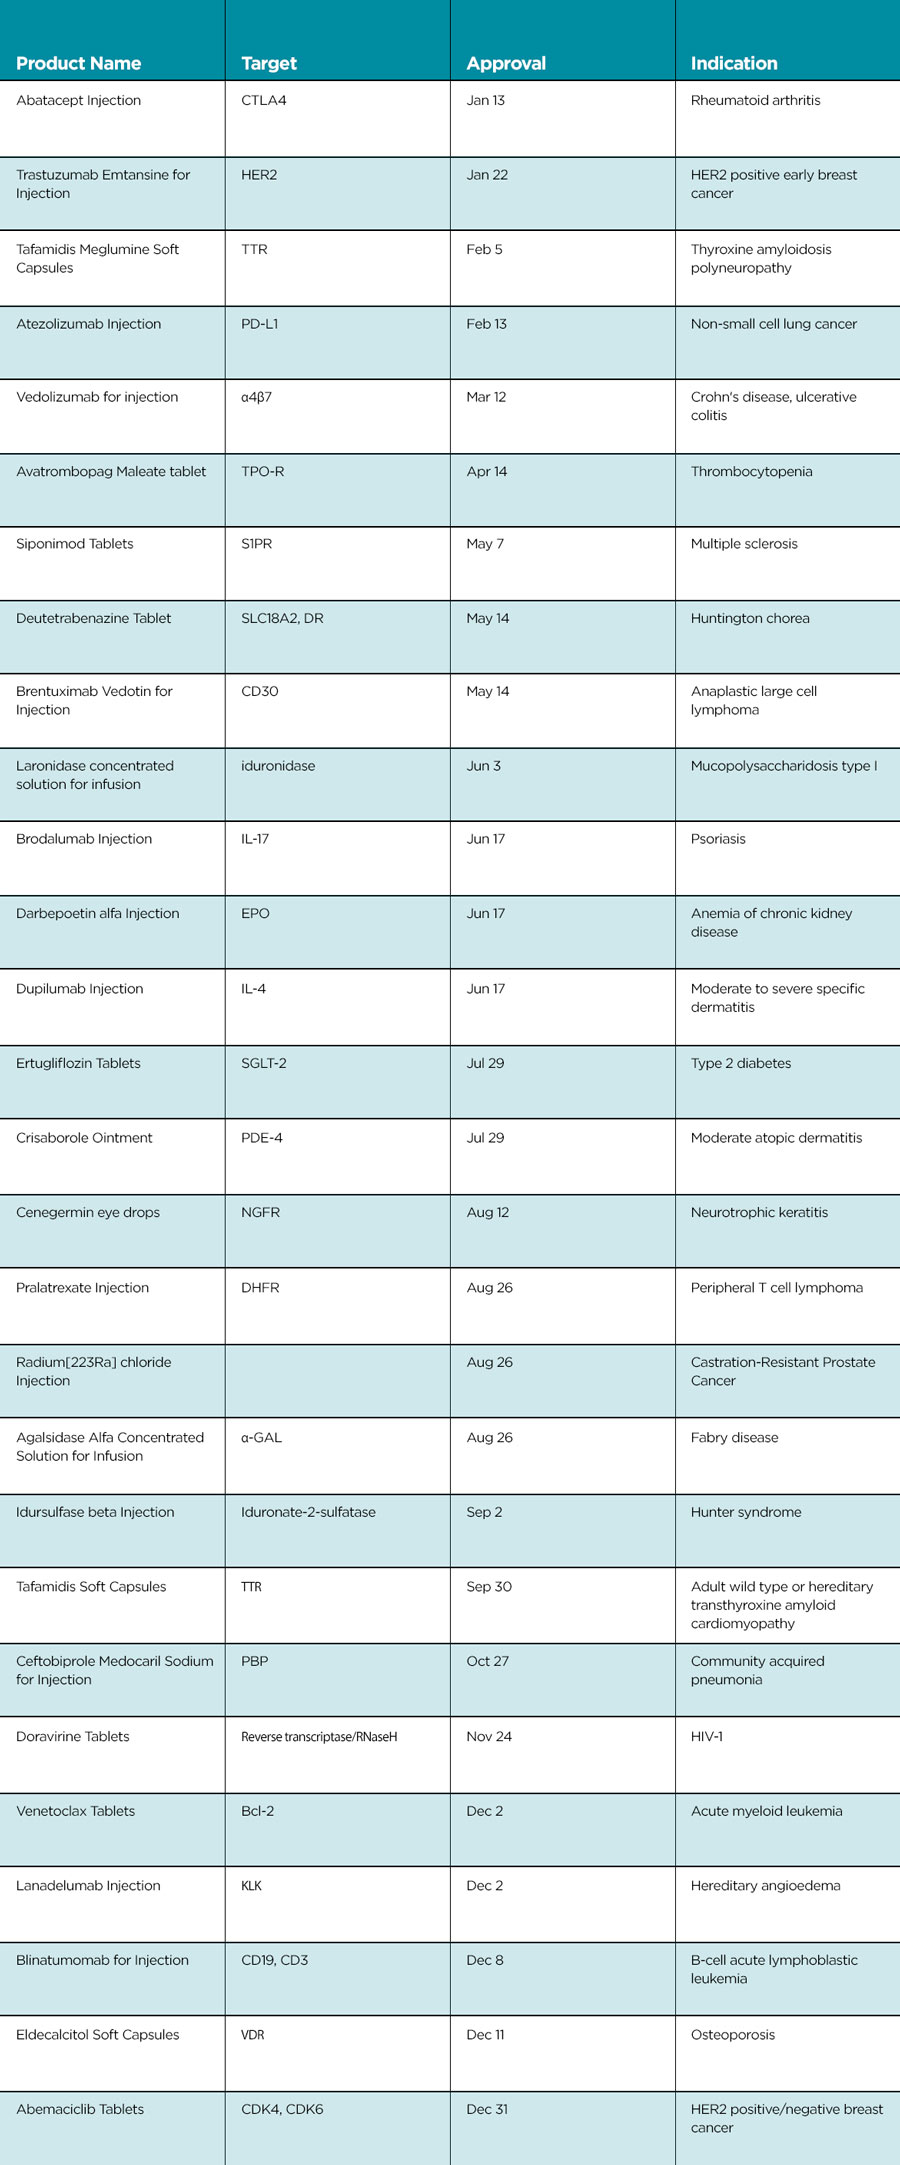 Table 2. New Drugs Approved by NMPA in 2020: Non-Domestic Companies